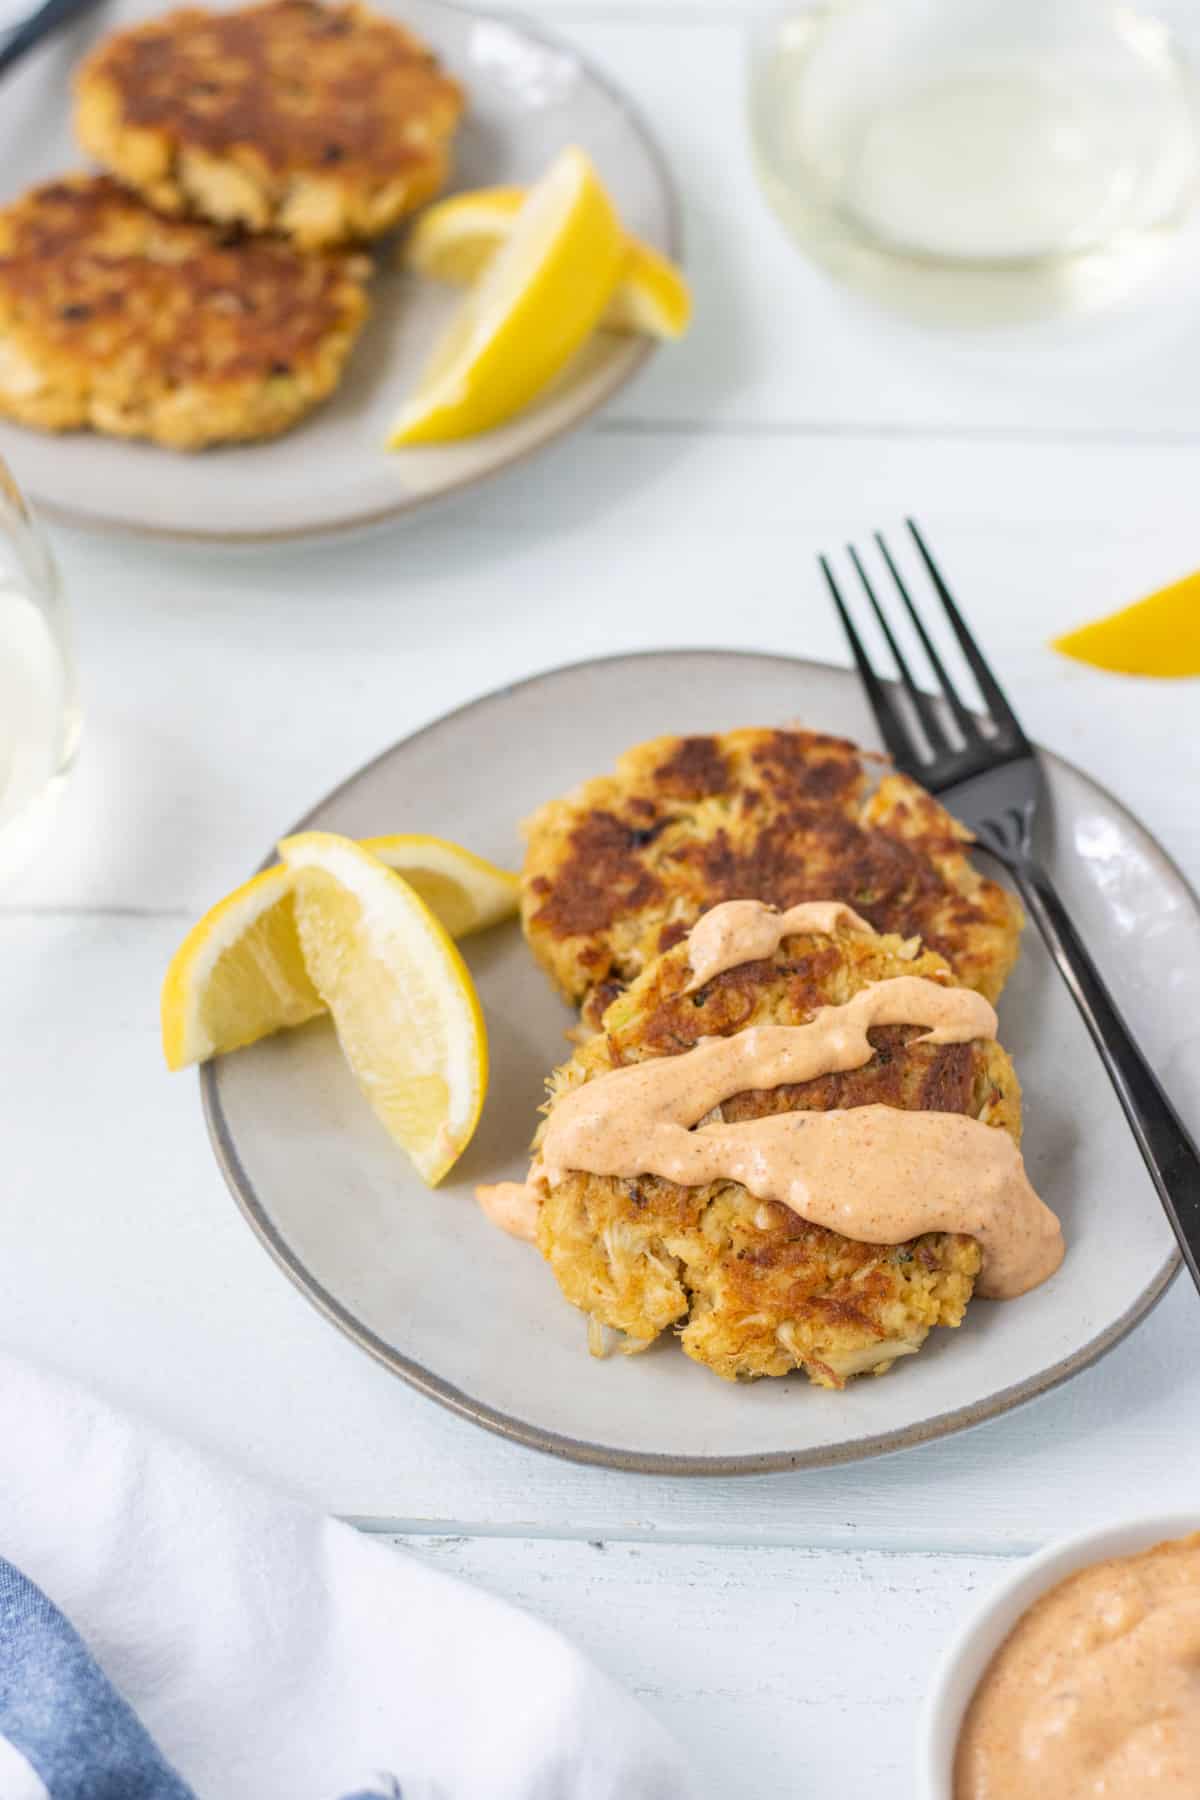 Crab cakes with remoulade sauce on them with lemon wedges.